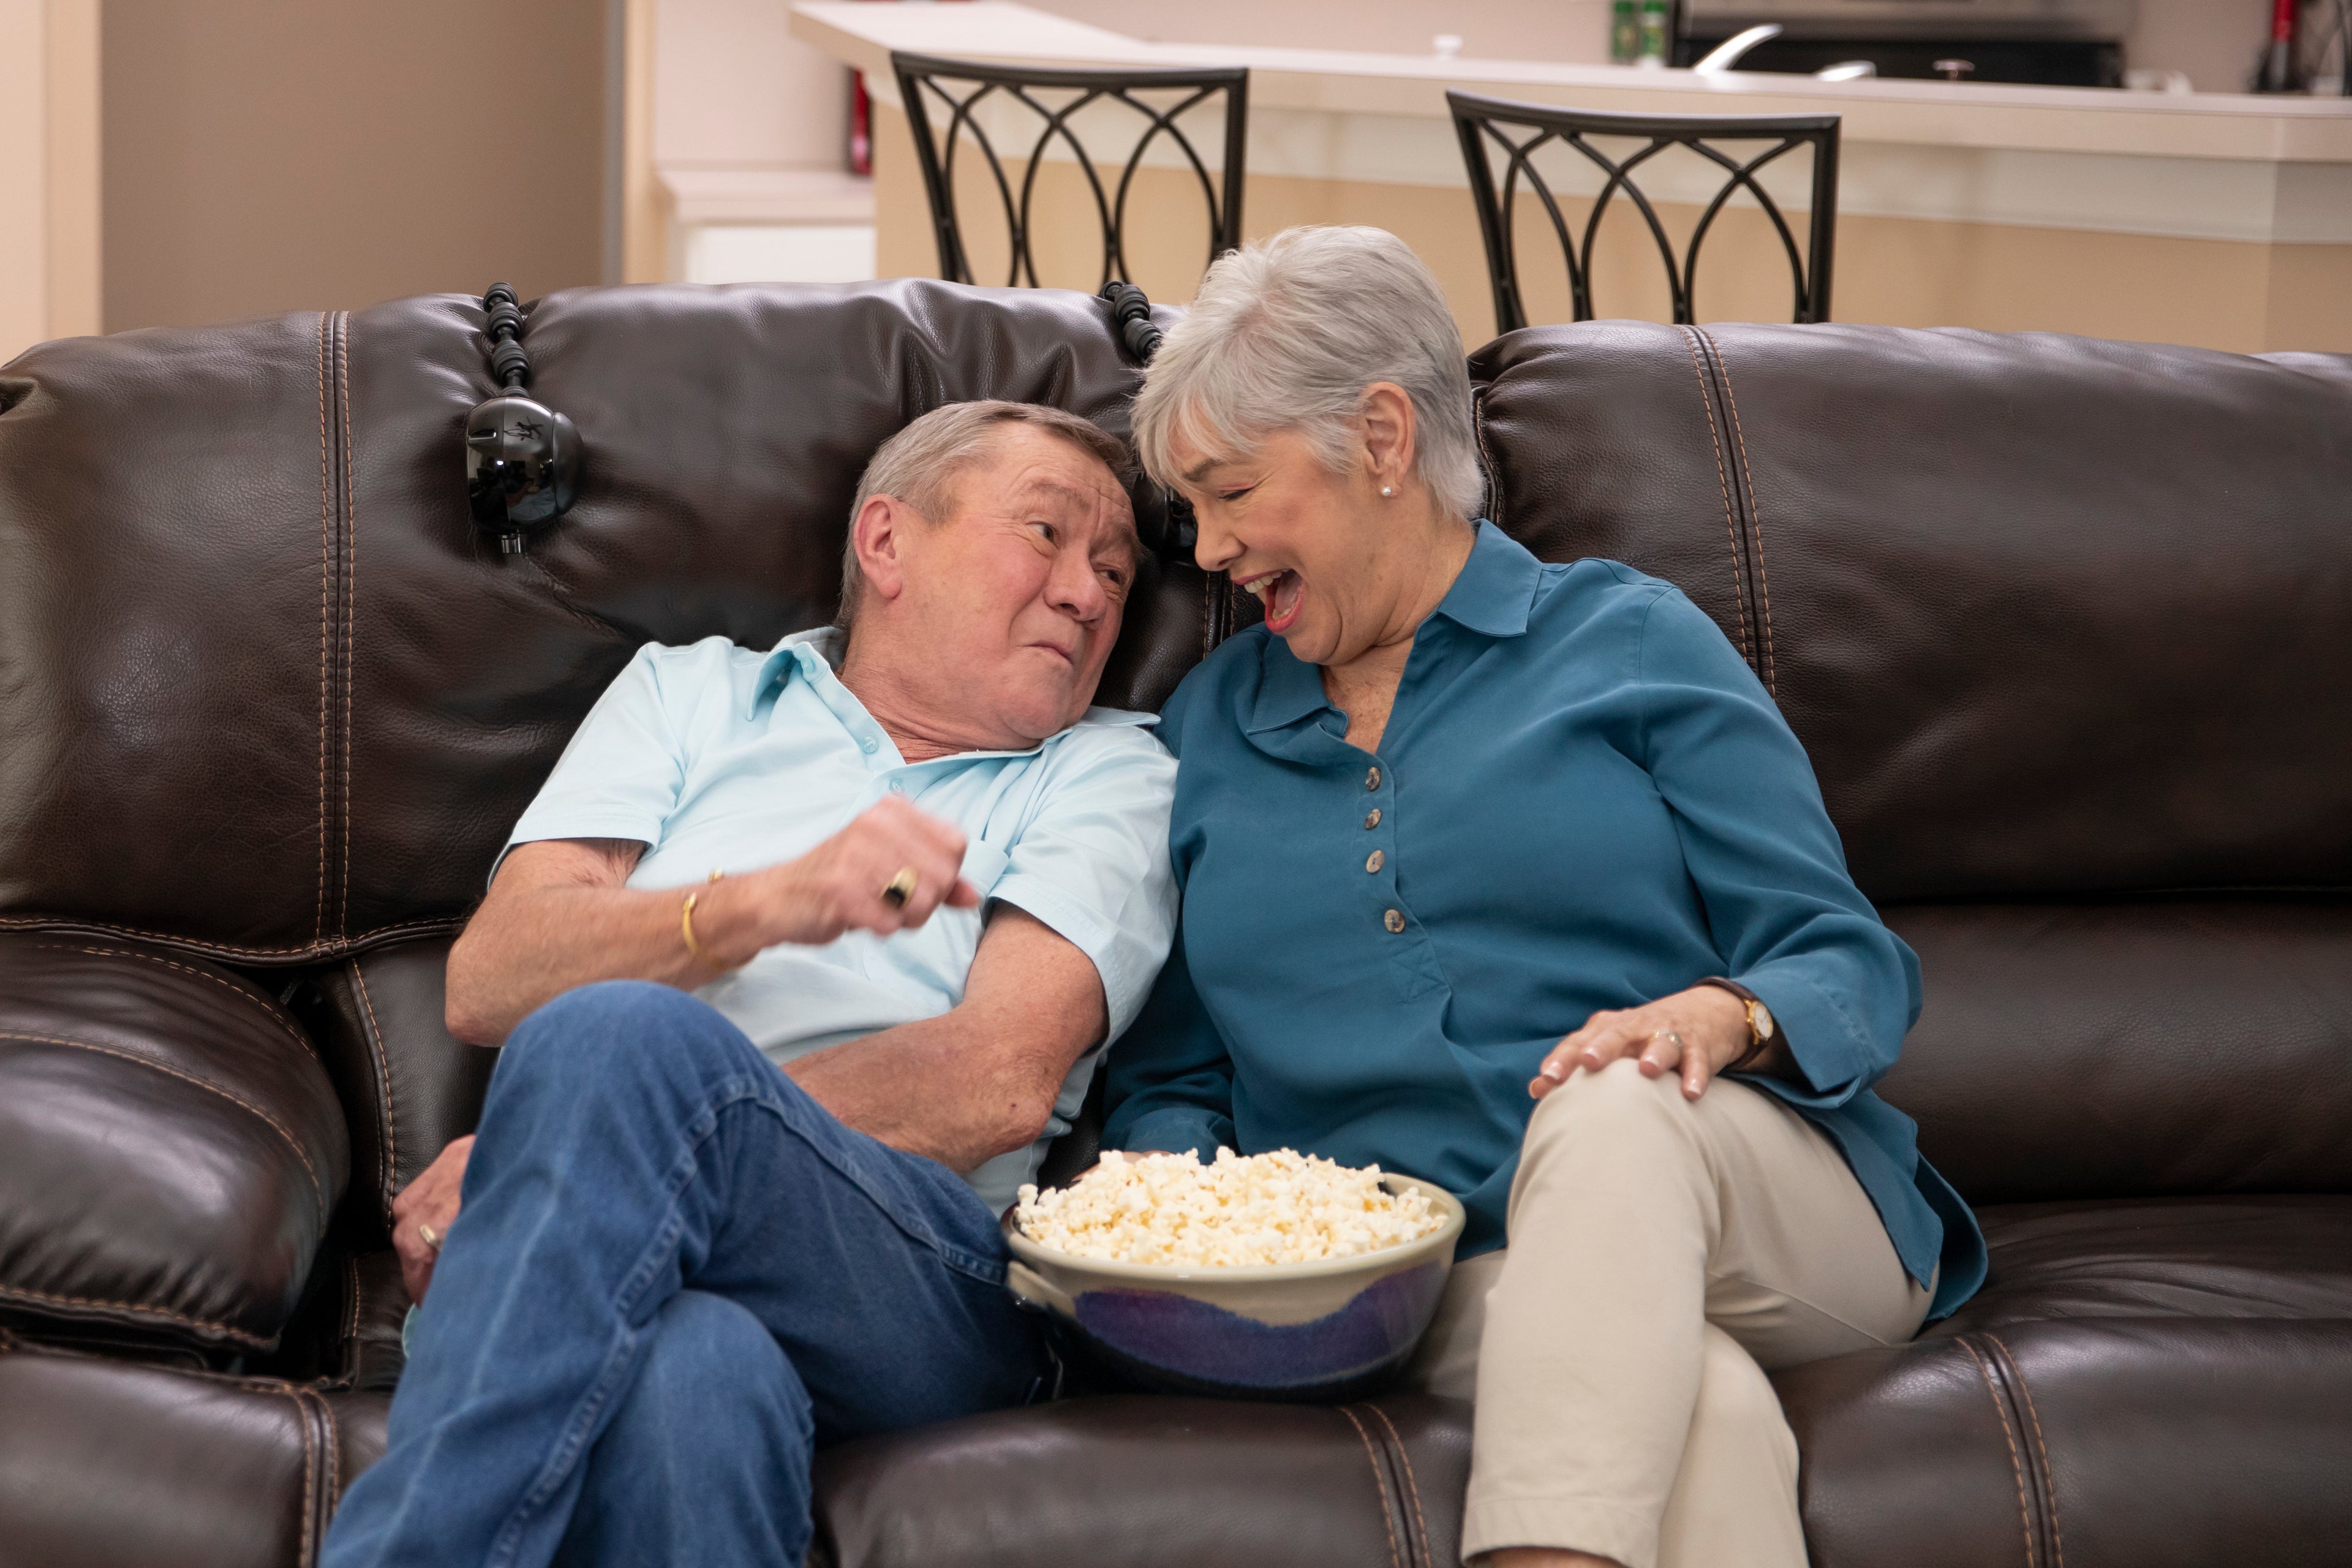 Senior couple enjoying a movie on the sofa with the ChairSpeaker system, showcasing the convenience of personal audio for a shared entertainment experience.